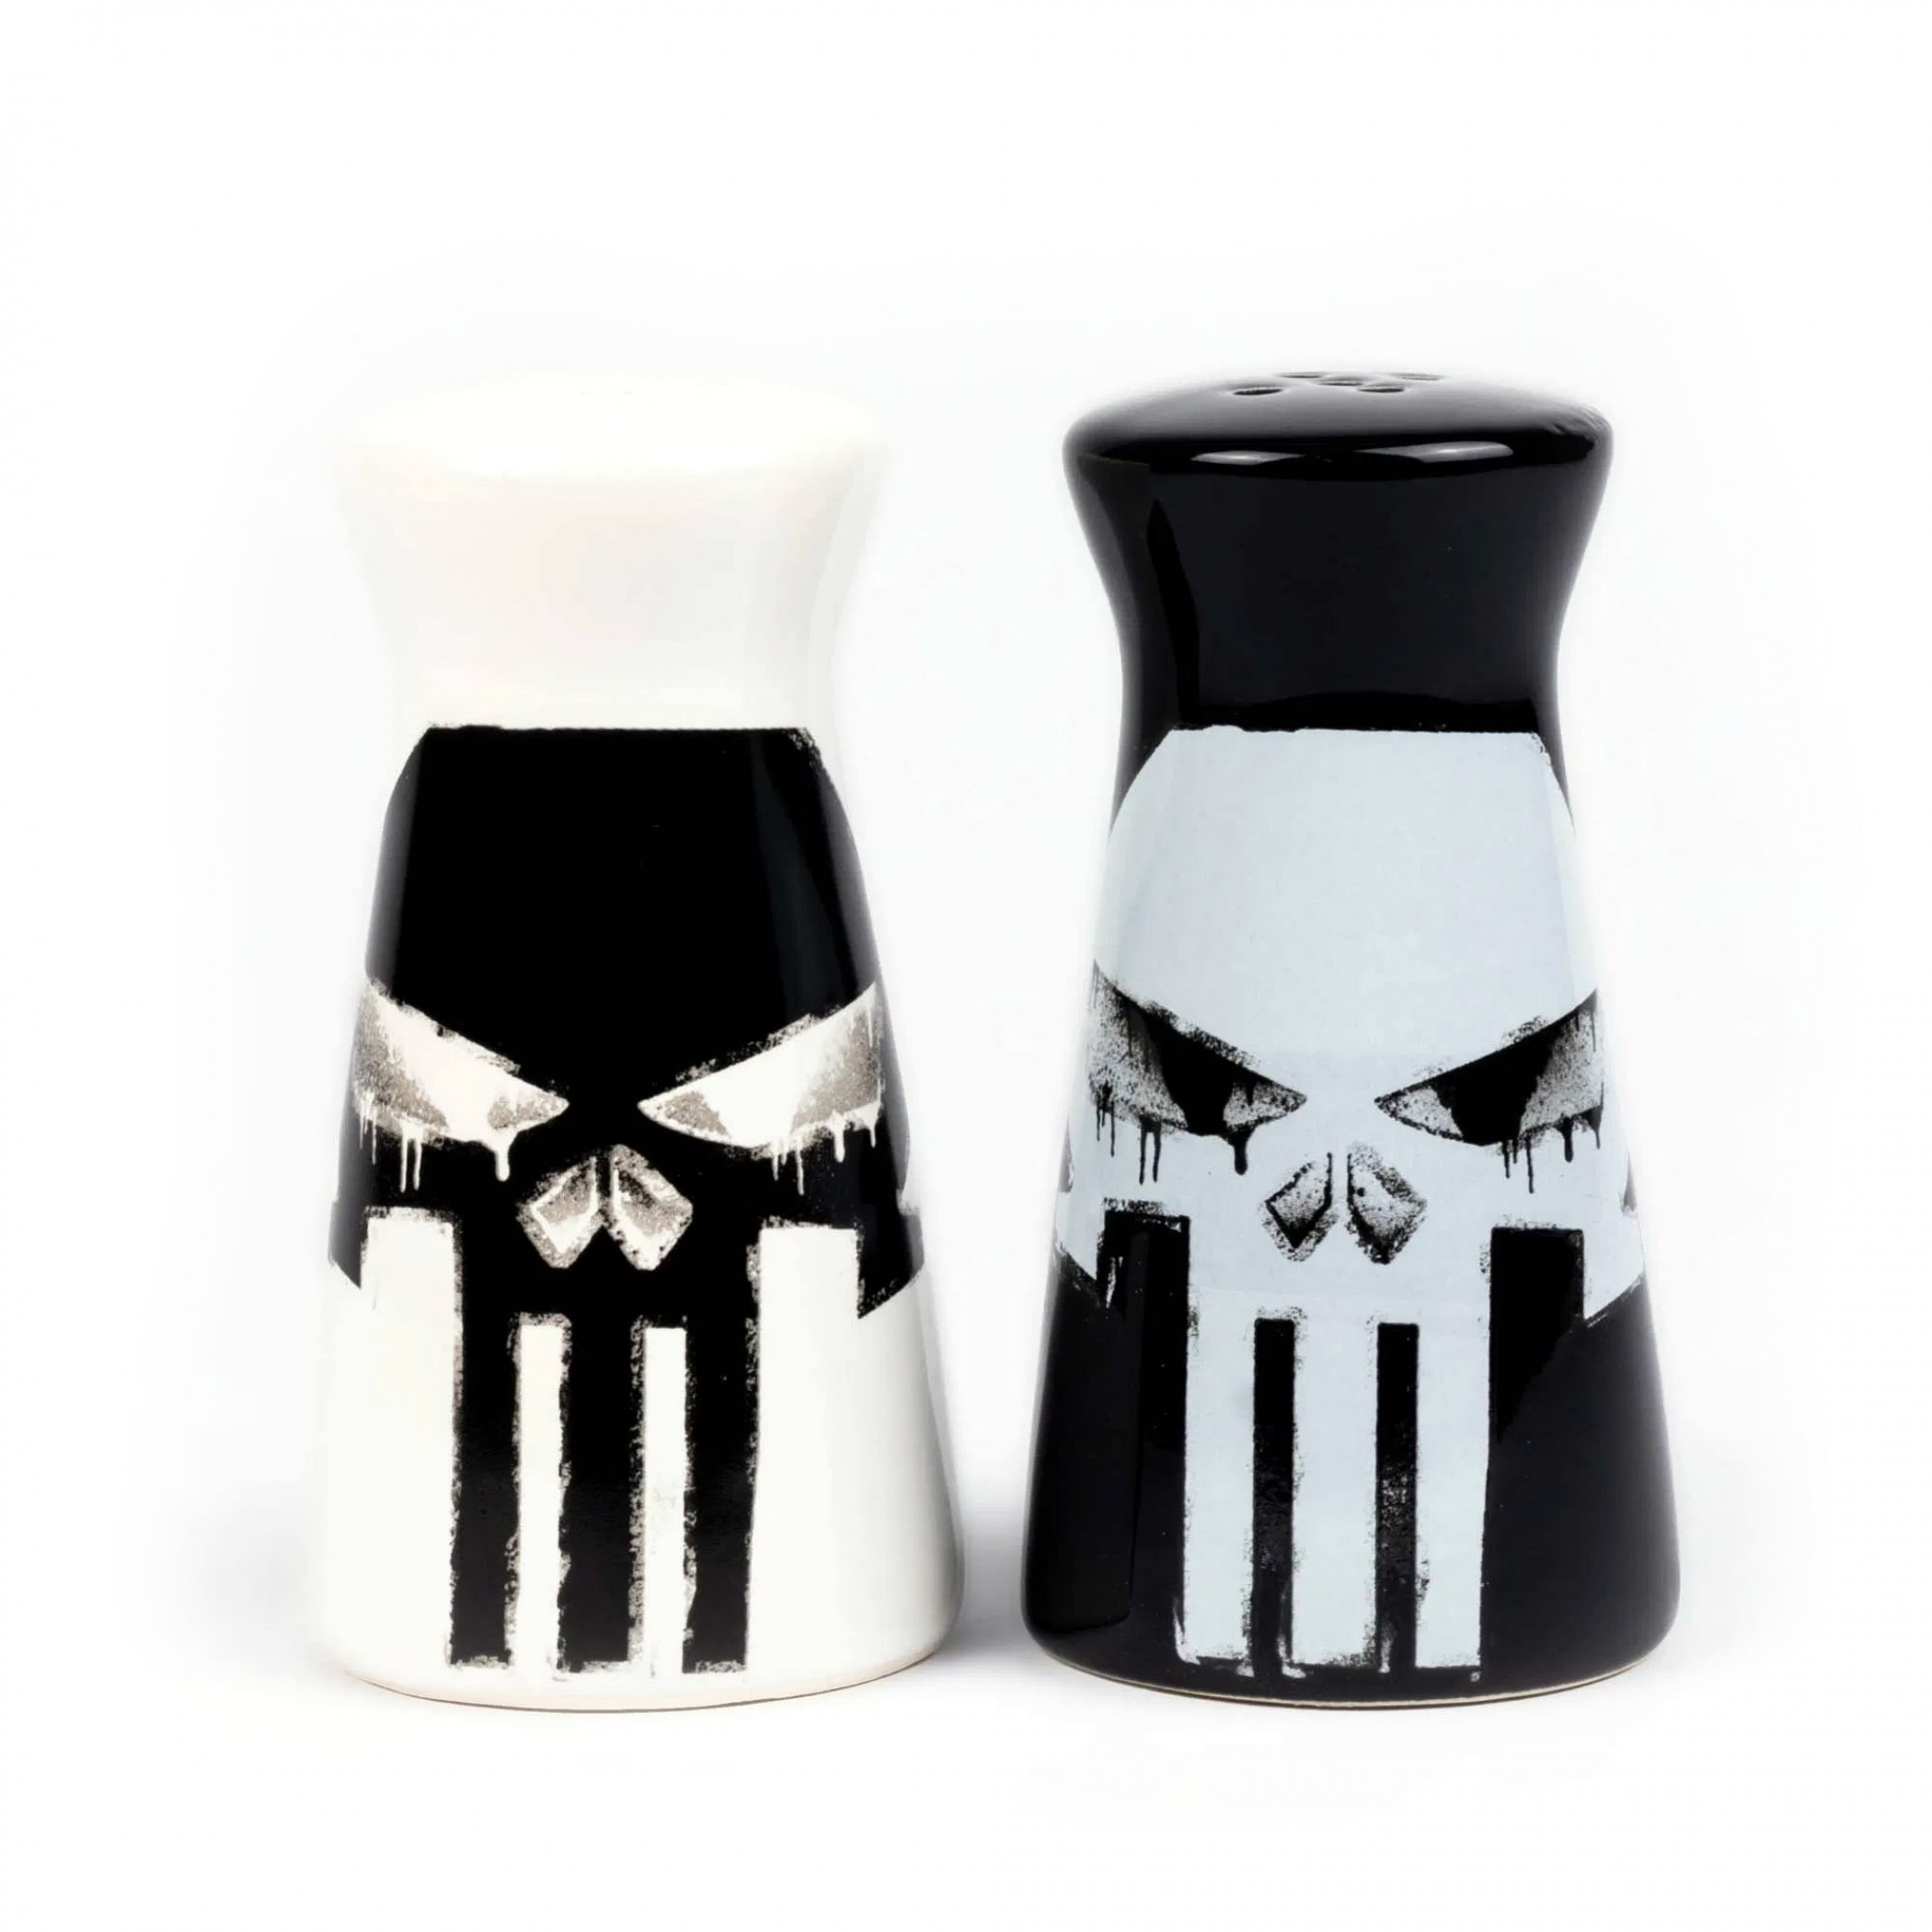 Punisher Salt and Pepper Shakers